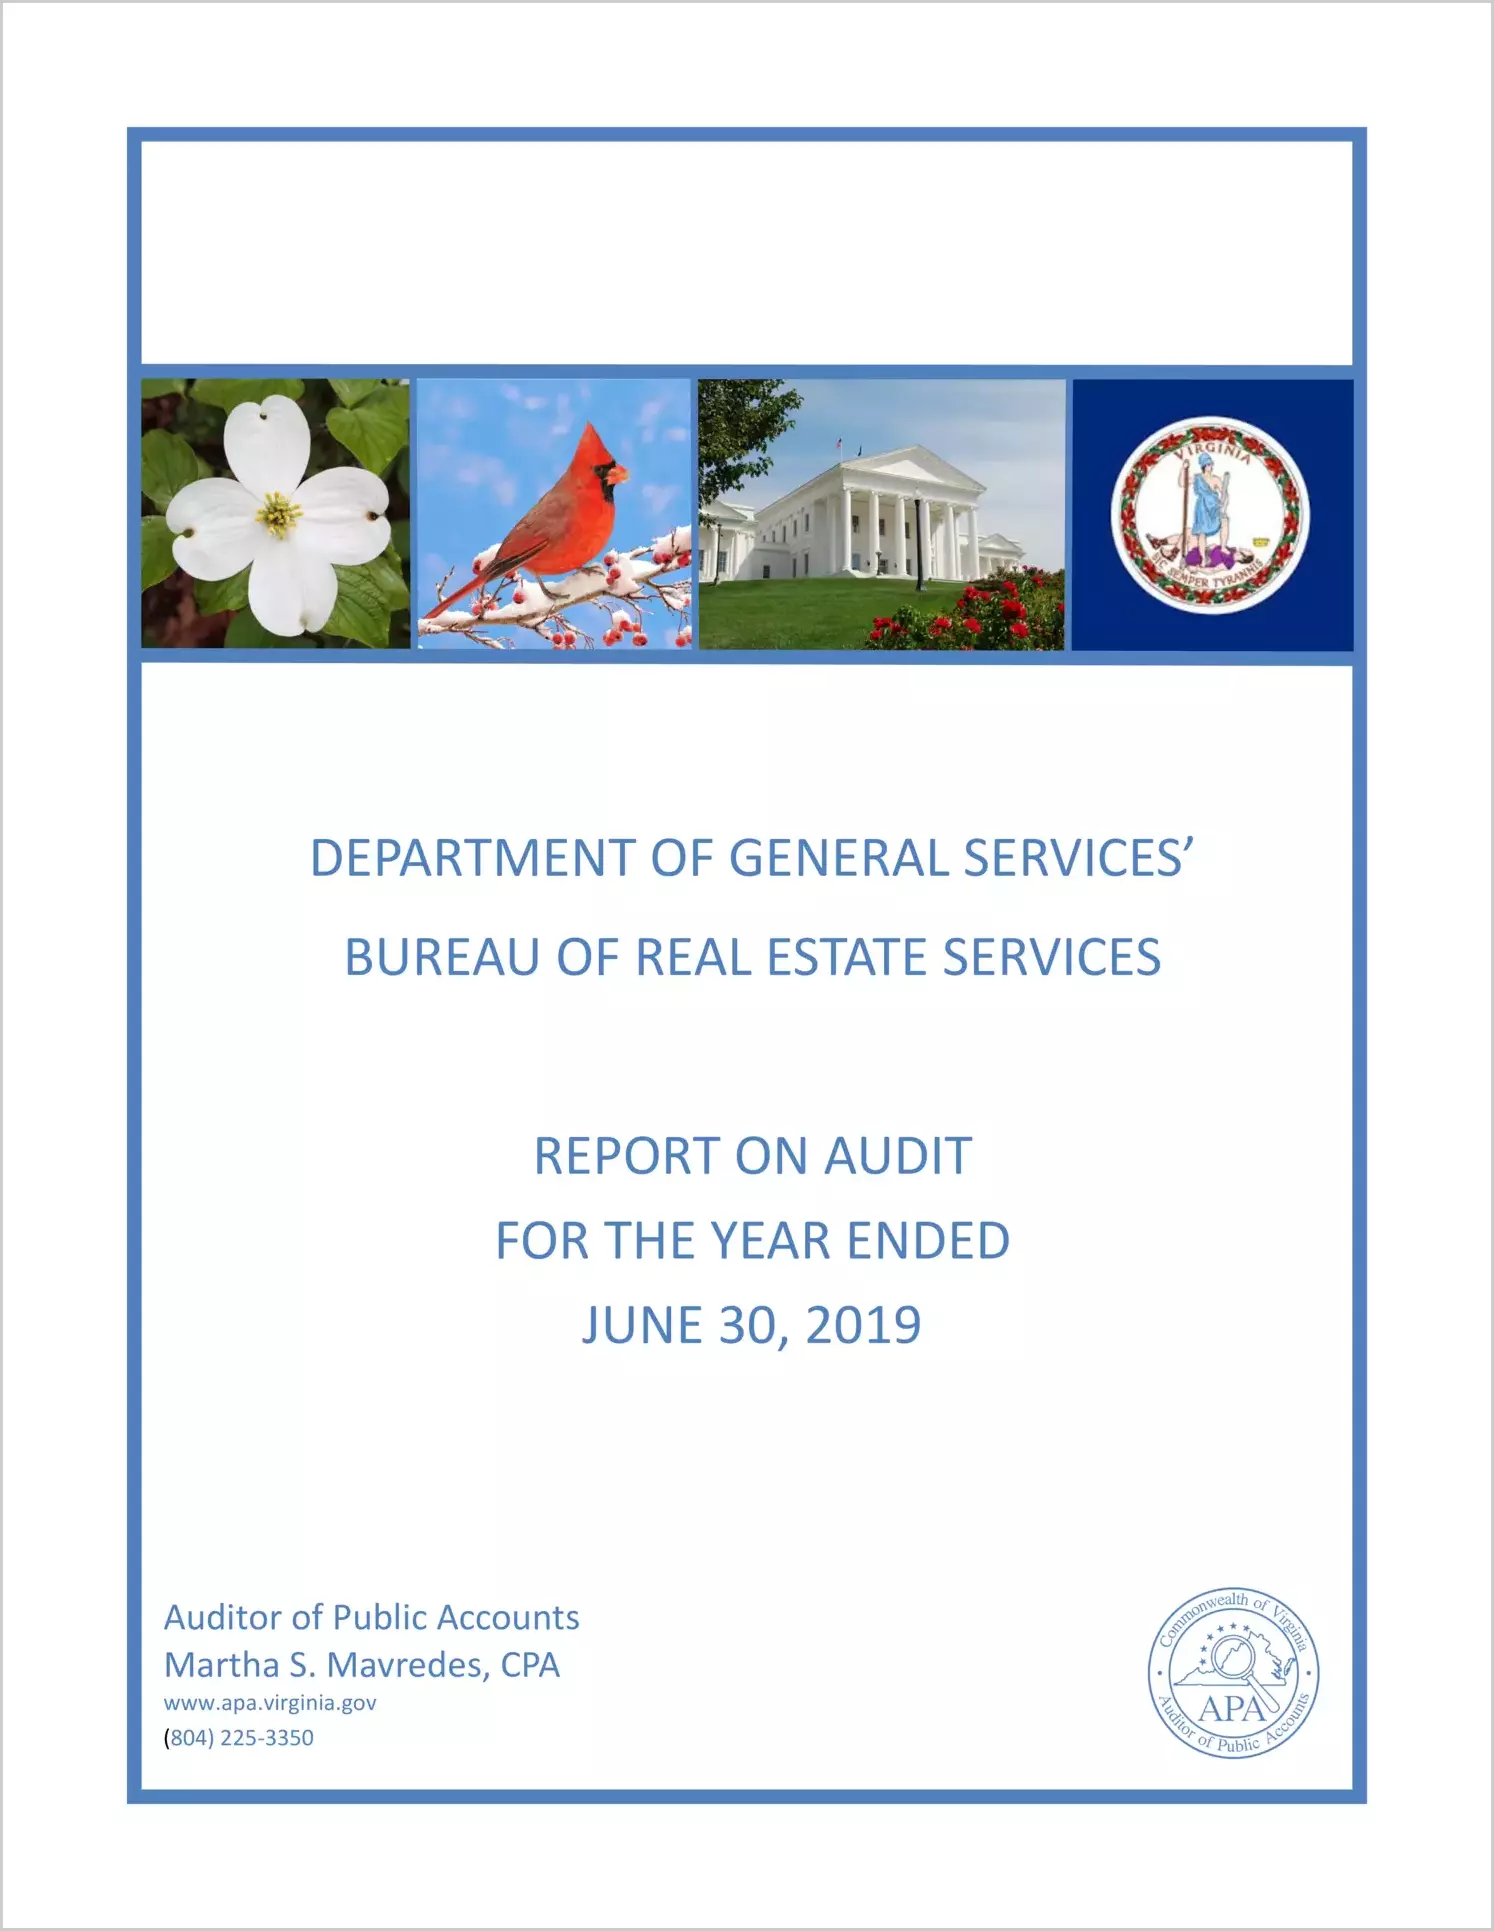 Department of General Service's Division of Real Estate Services for the year ended June 30, 2019